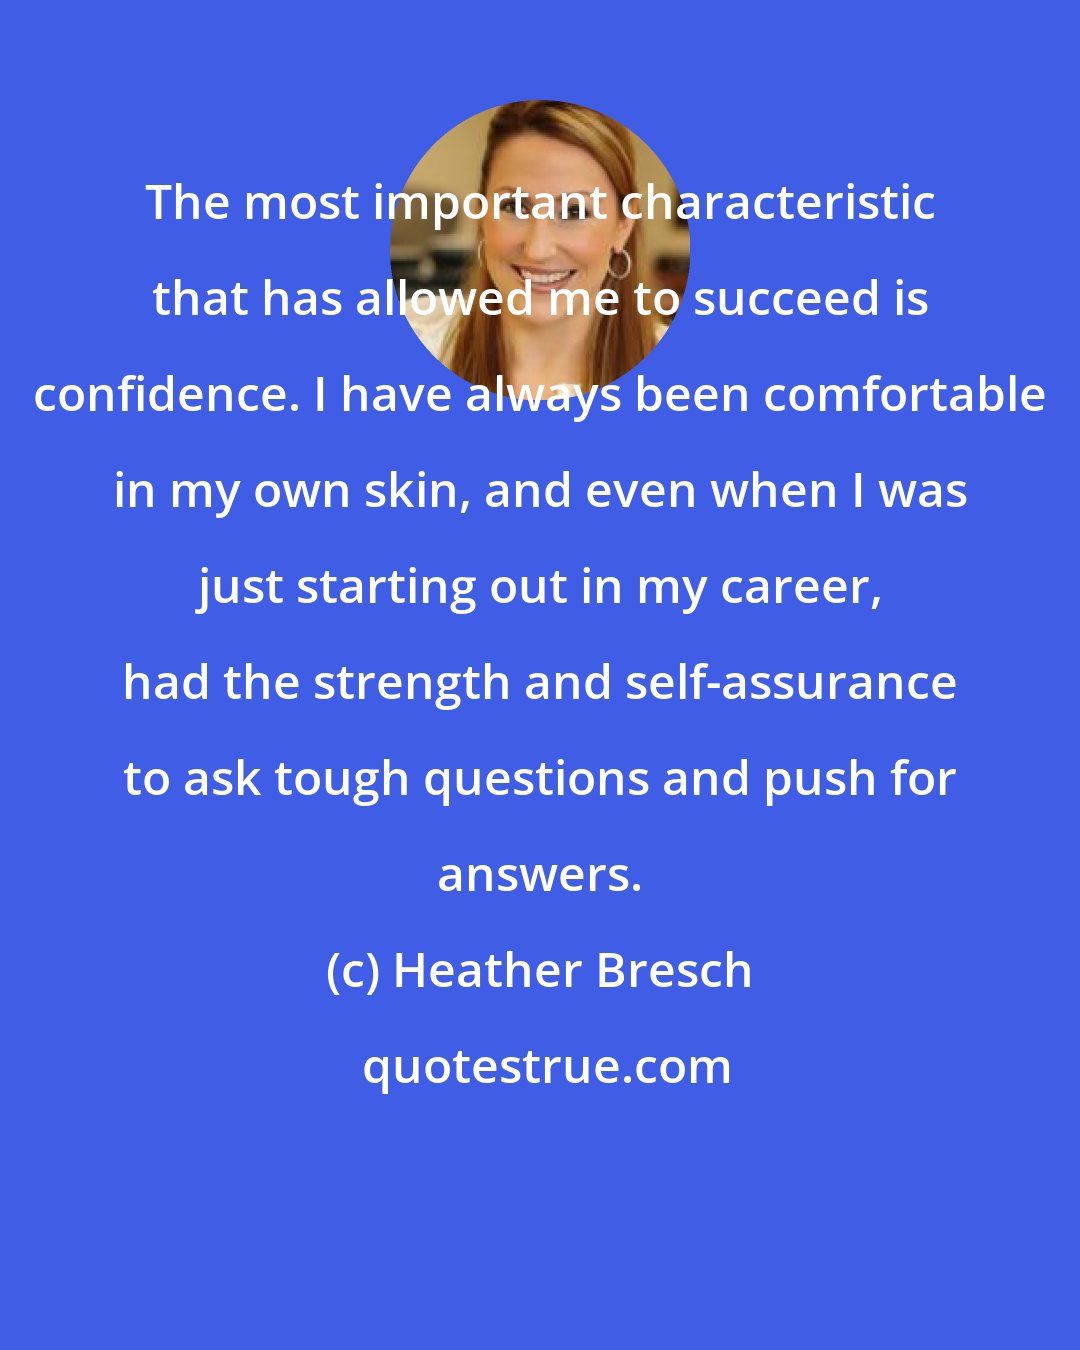 Heather Bresch: The most important characteristic that has allowed me to succeed is confidence. I have always been comfortable in my own skin, and even when I was just starting out in my career, had the strength and self-assurance to ask tough questions and push for answers.